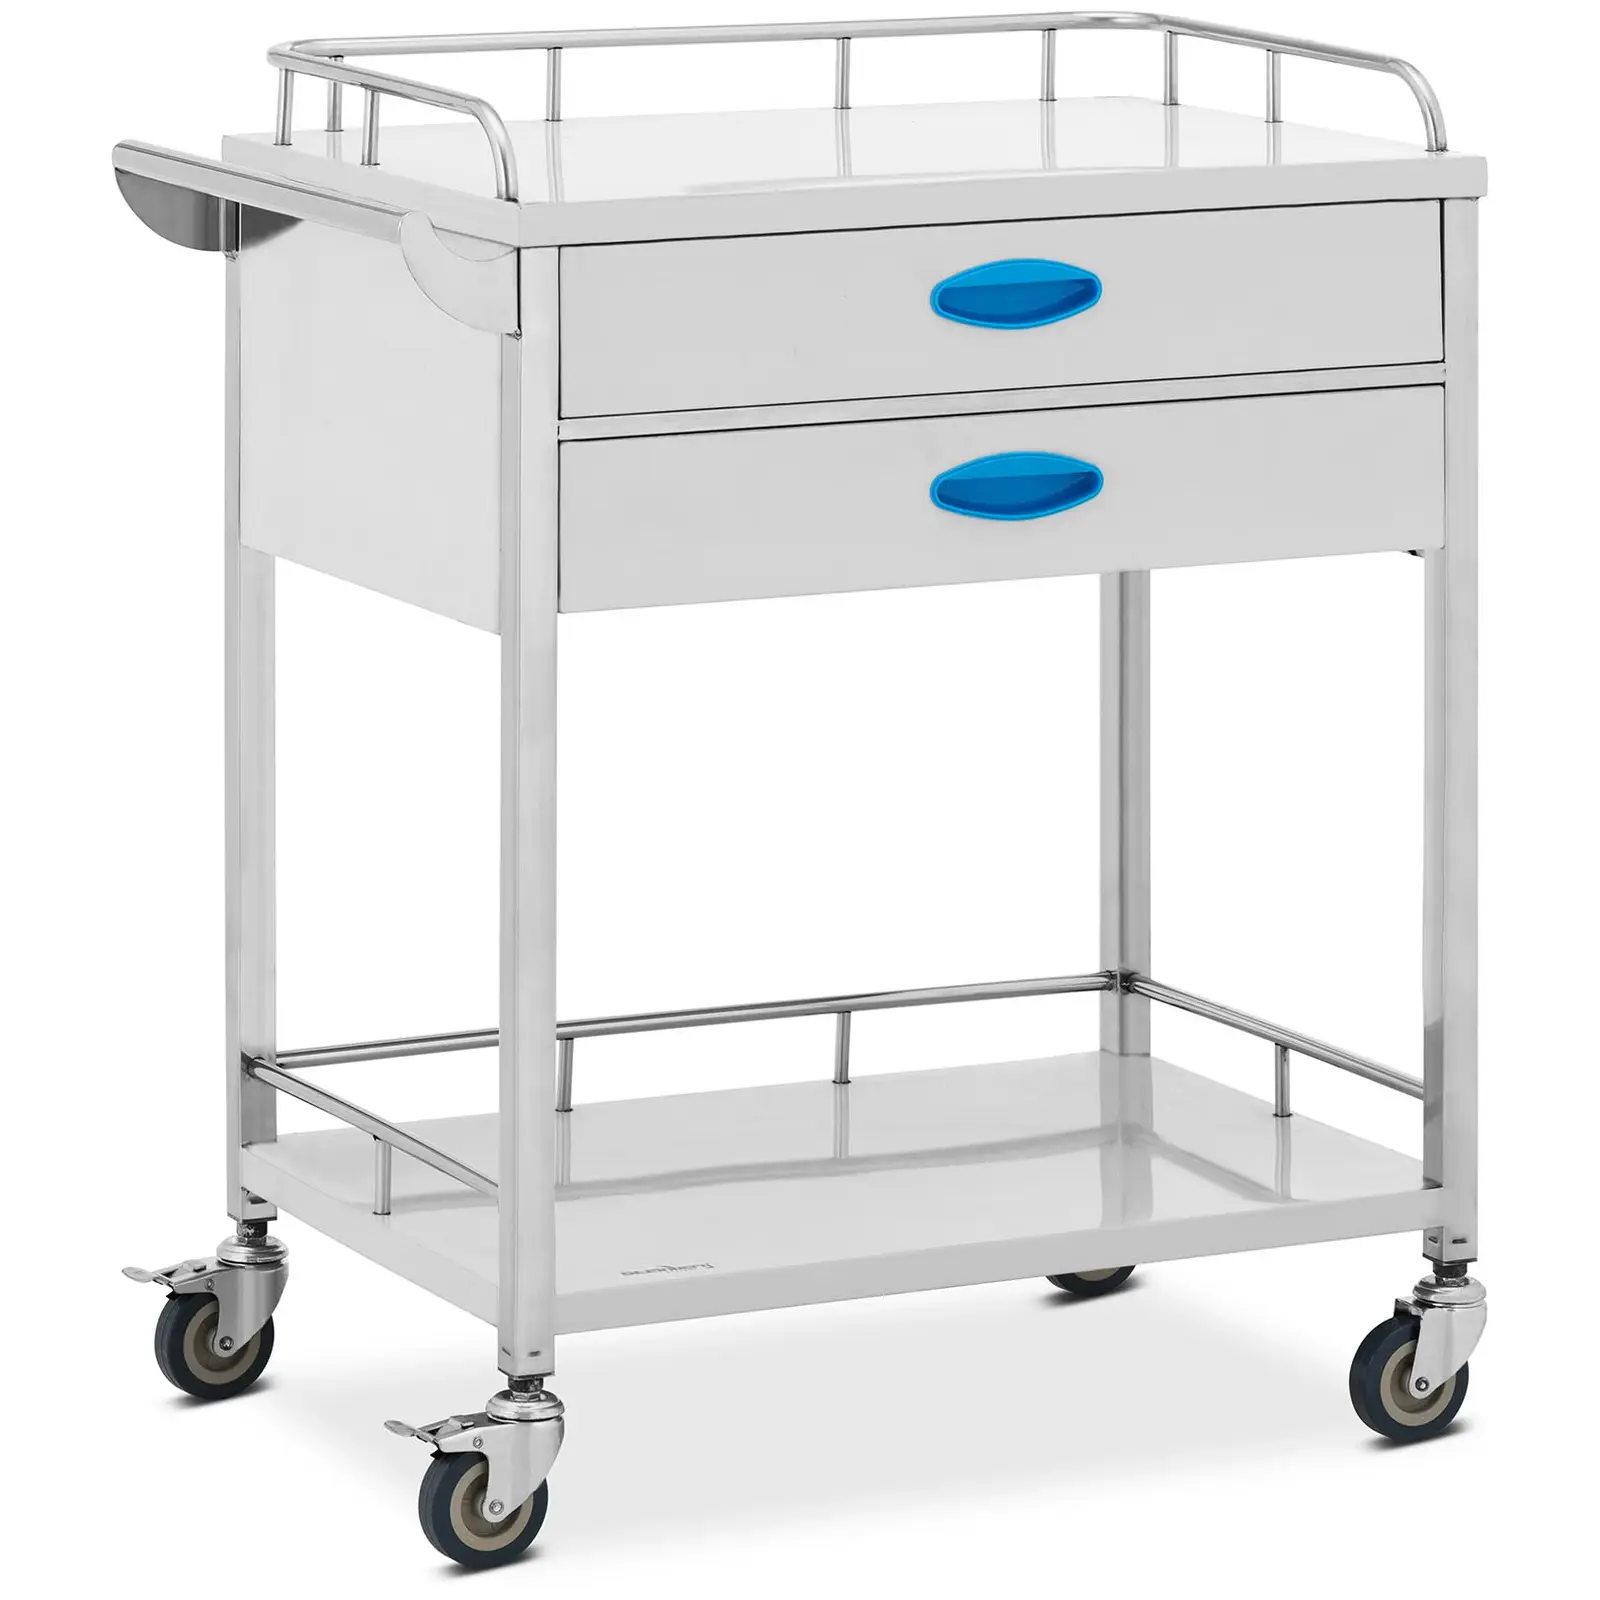 Laboratory Trolley - stainless steel - 2 shelves each 60 x 41 x 26 cm - 2 drawers - 40 kg